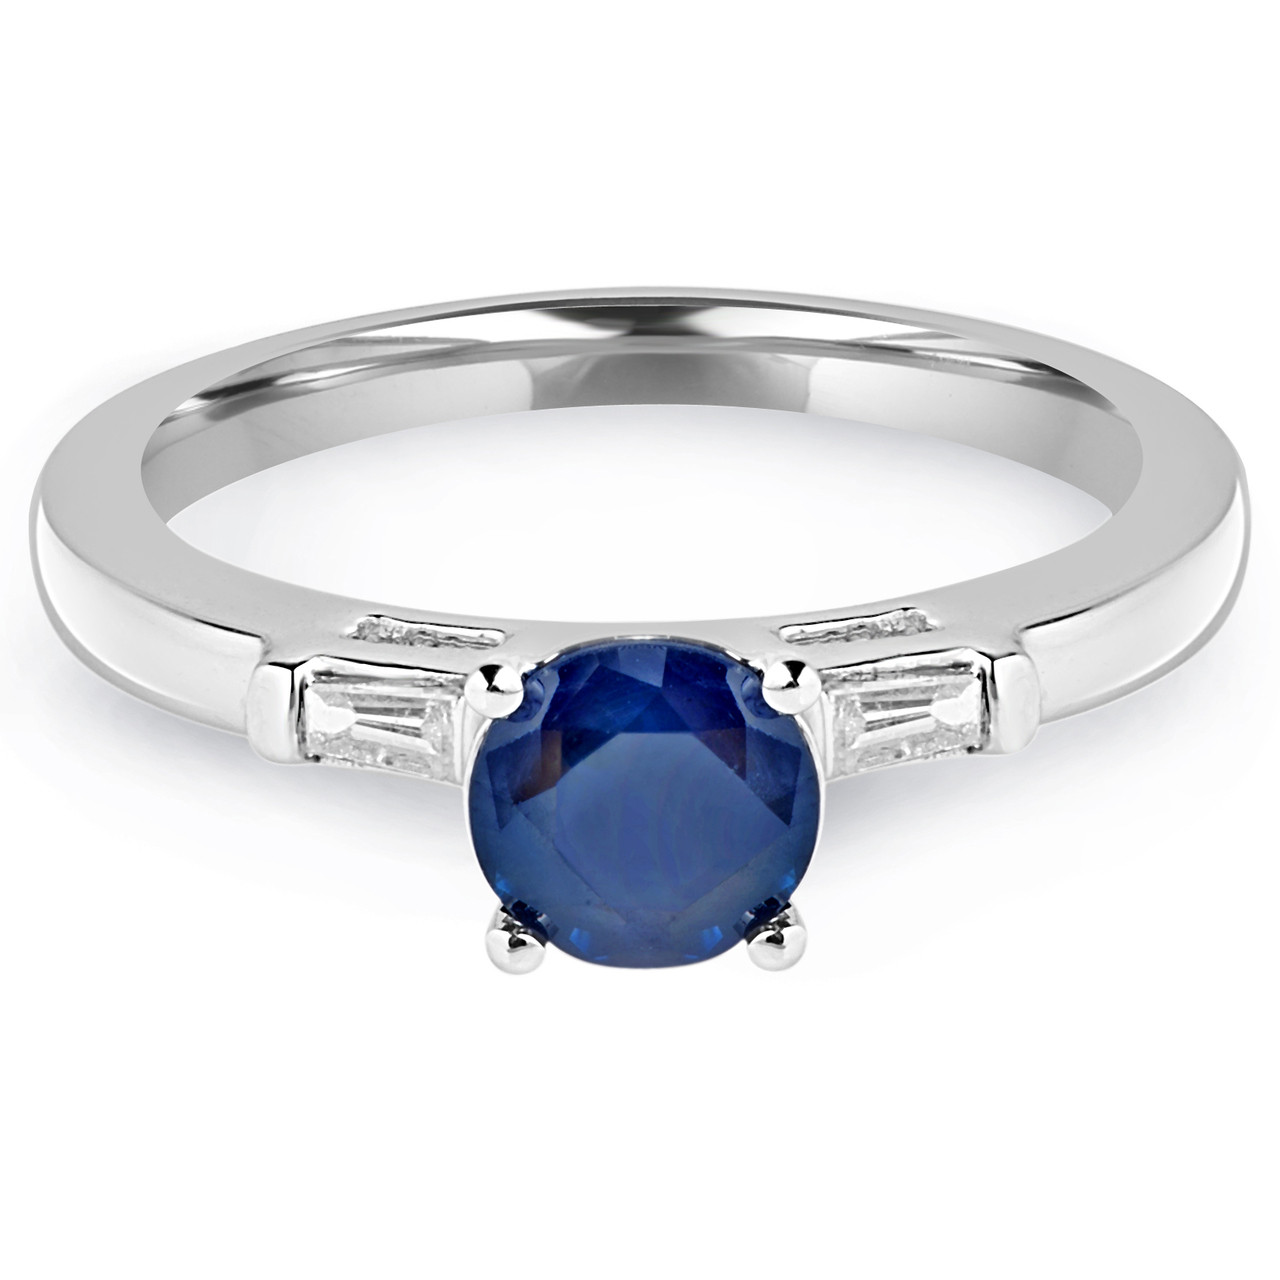 Round Cut Blue Sapphire Cocktail Ring 14K White Gold - #CSFROT1106G ...